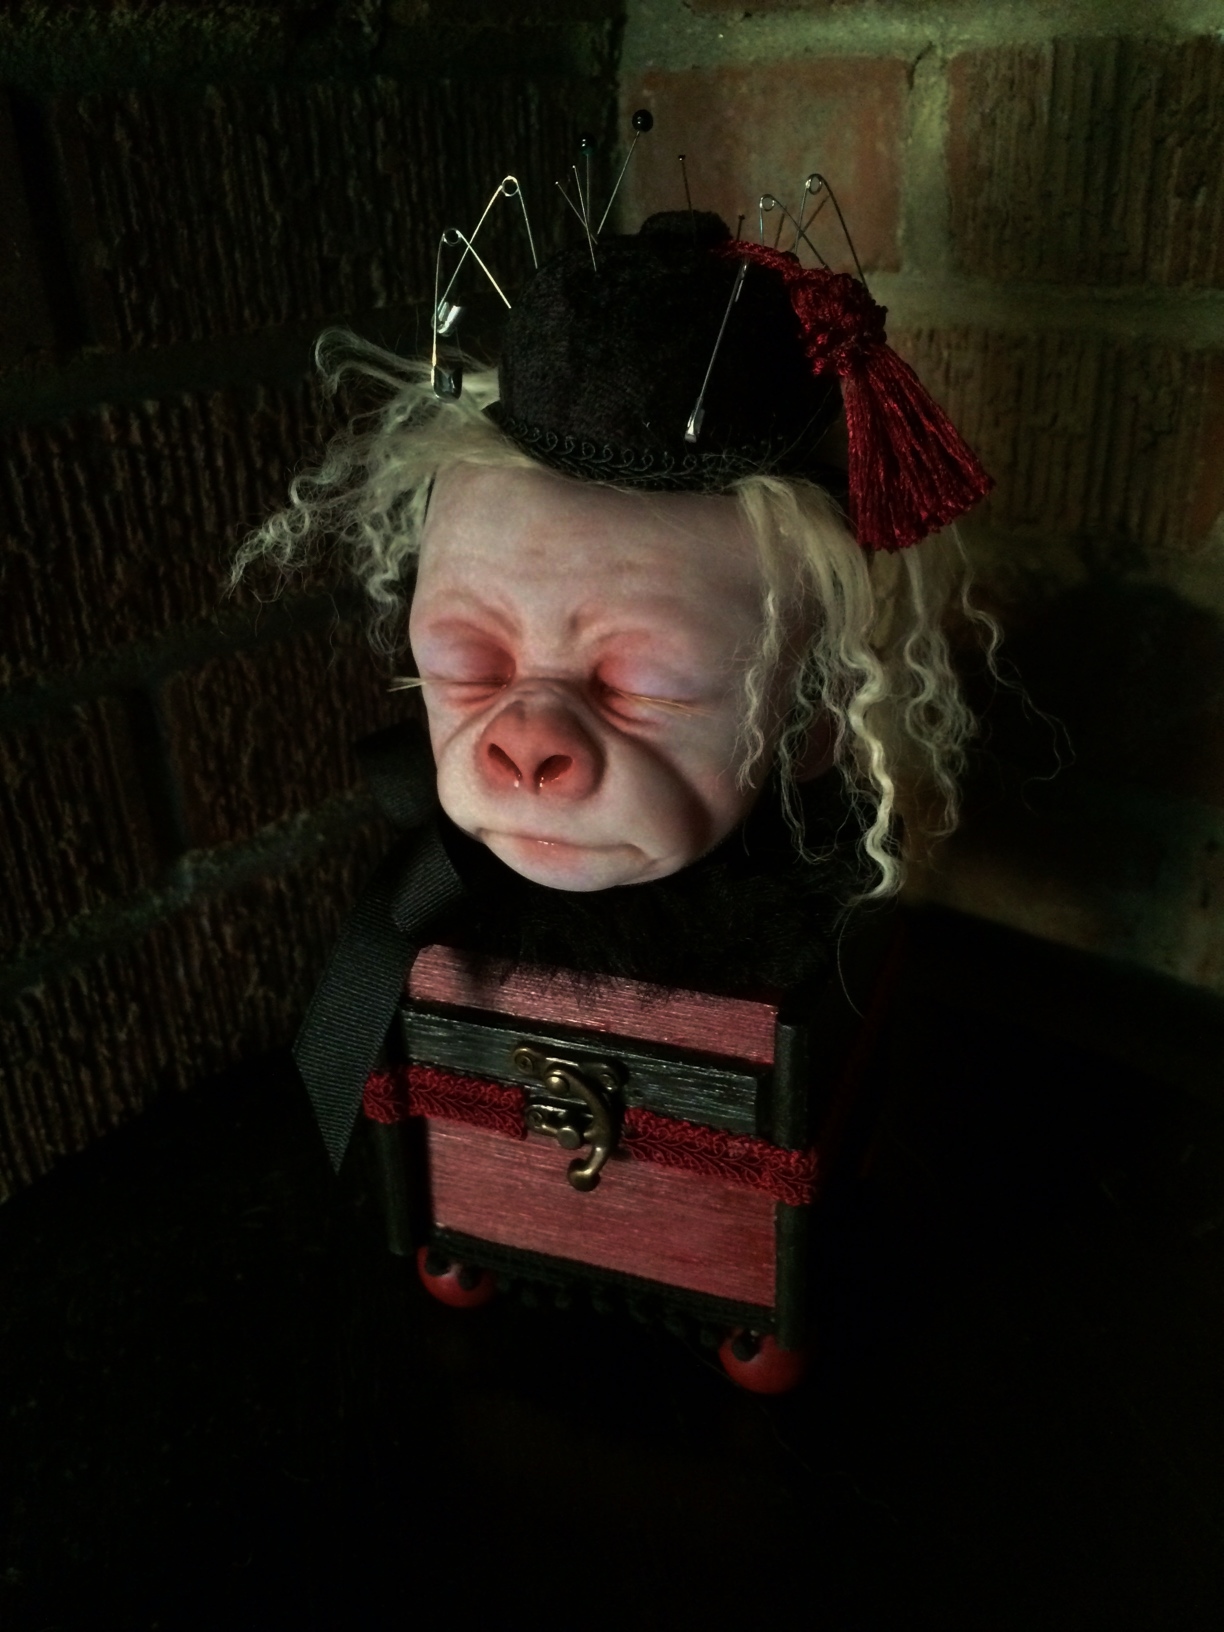 pale, albino gorilla face doll head with closed eyes and blond hair wearing a black pin cushion with a red tassel on his head set on top of a burgundy and black wooden box